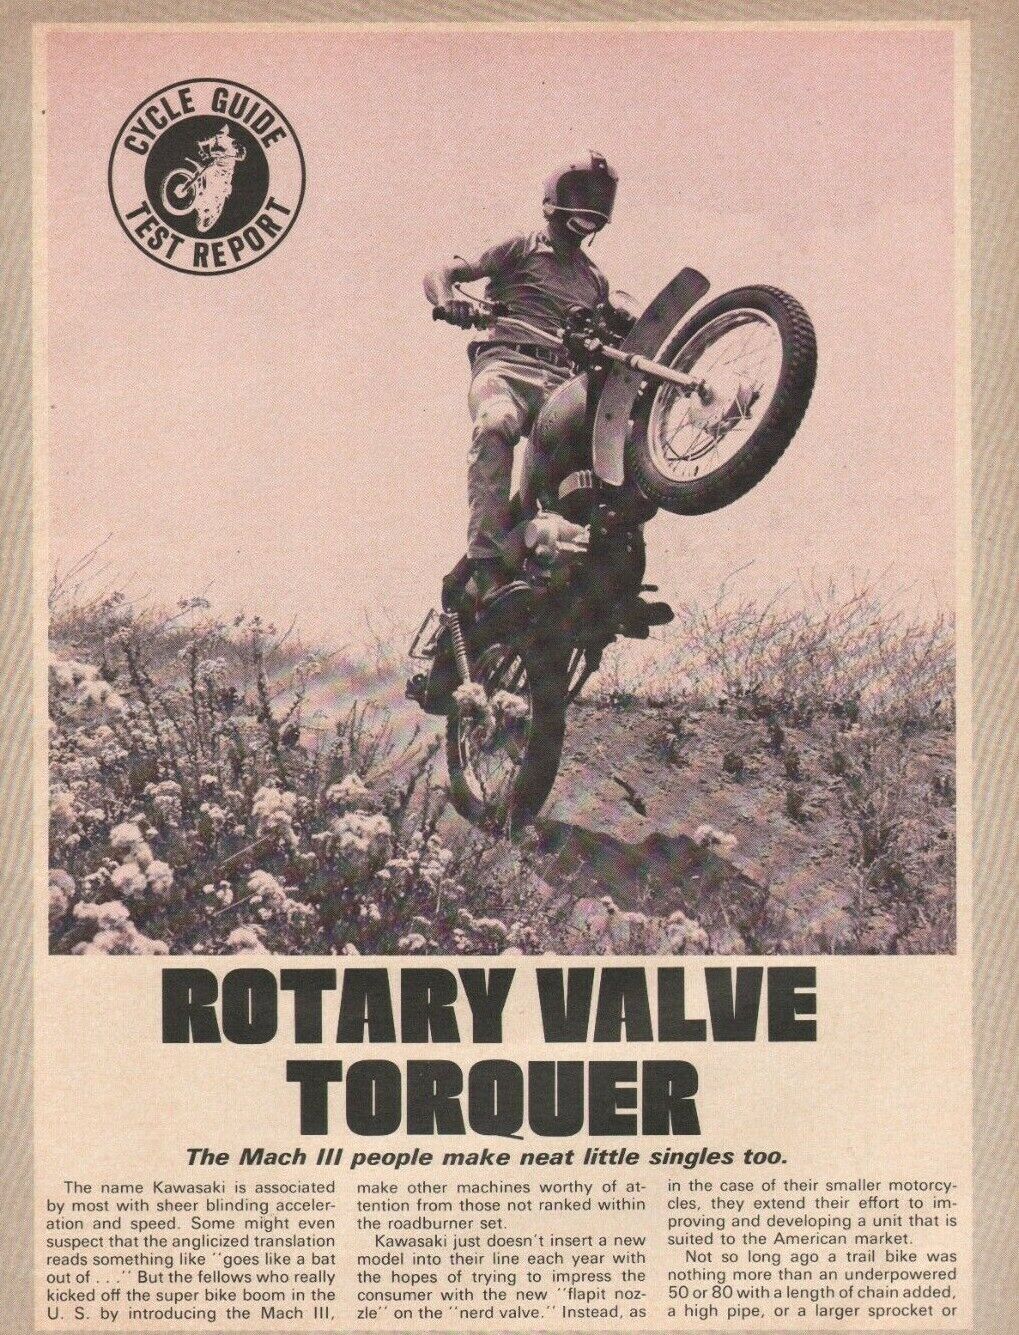 1972 Kawasaki 125 Rotary Valve Torquer - 5-Page Vintage Motorcycle Test Article